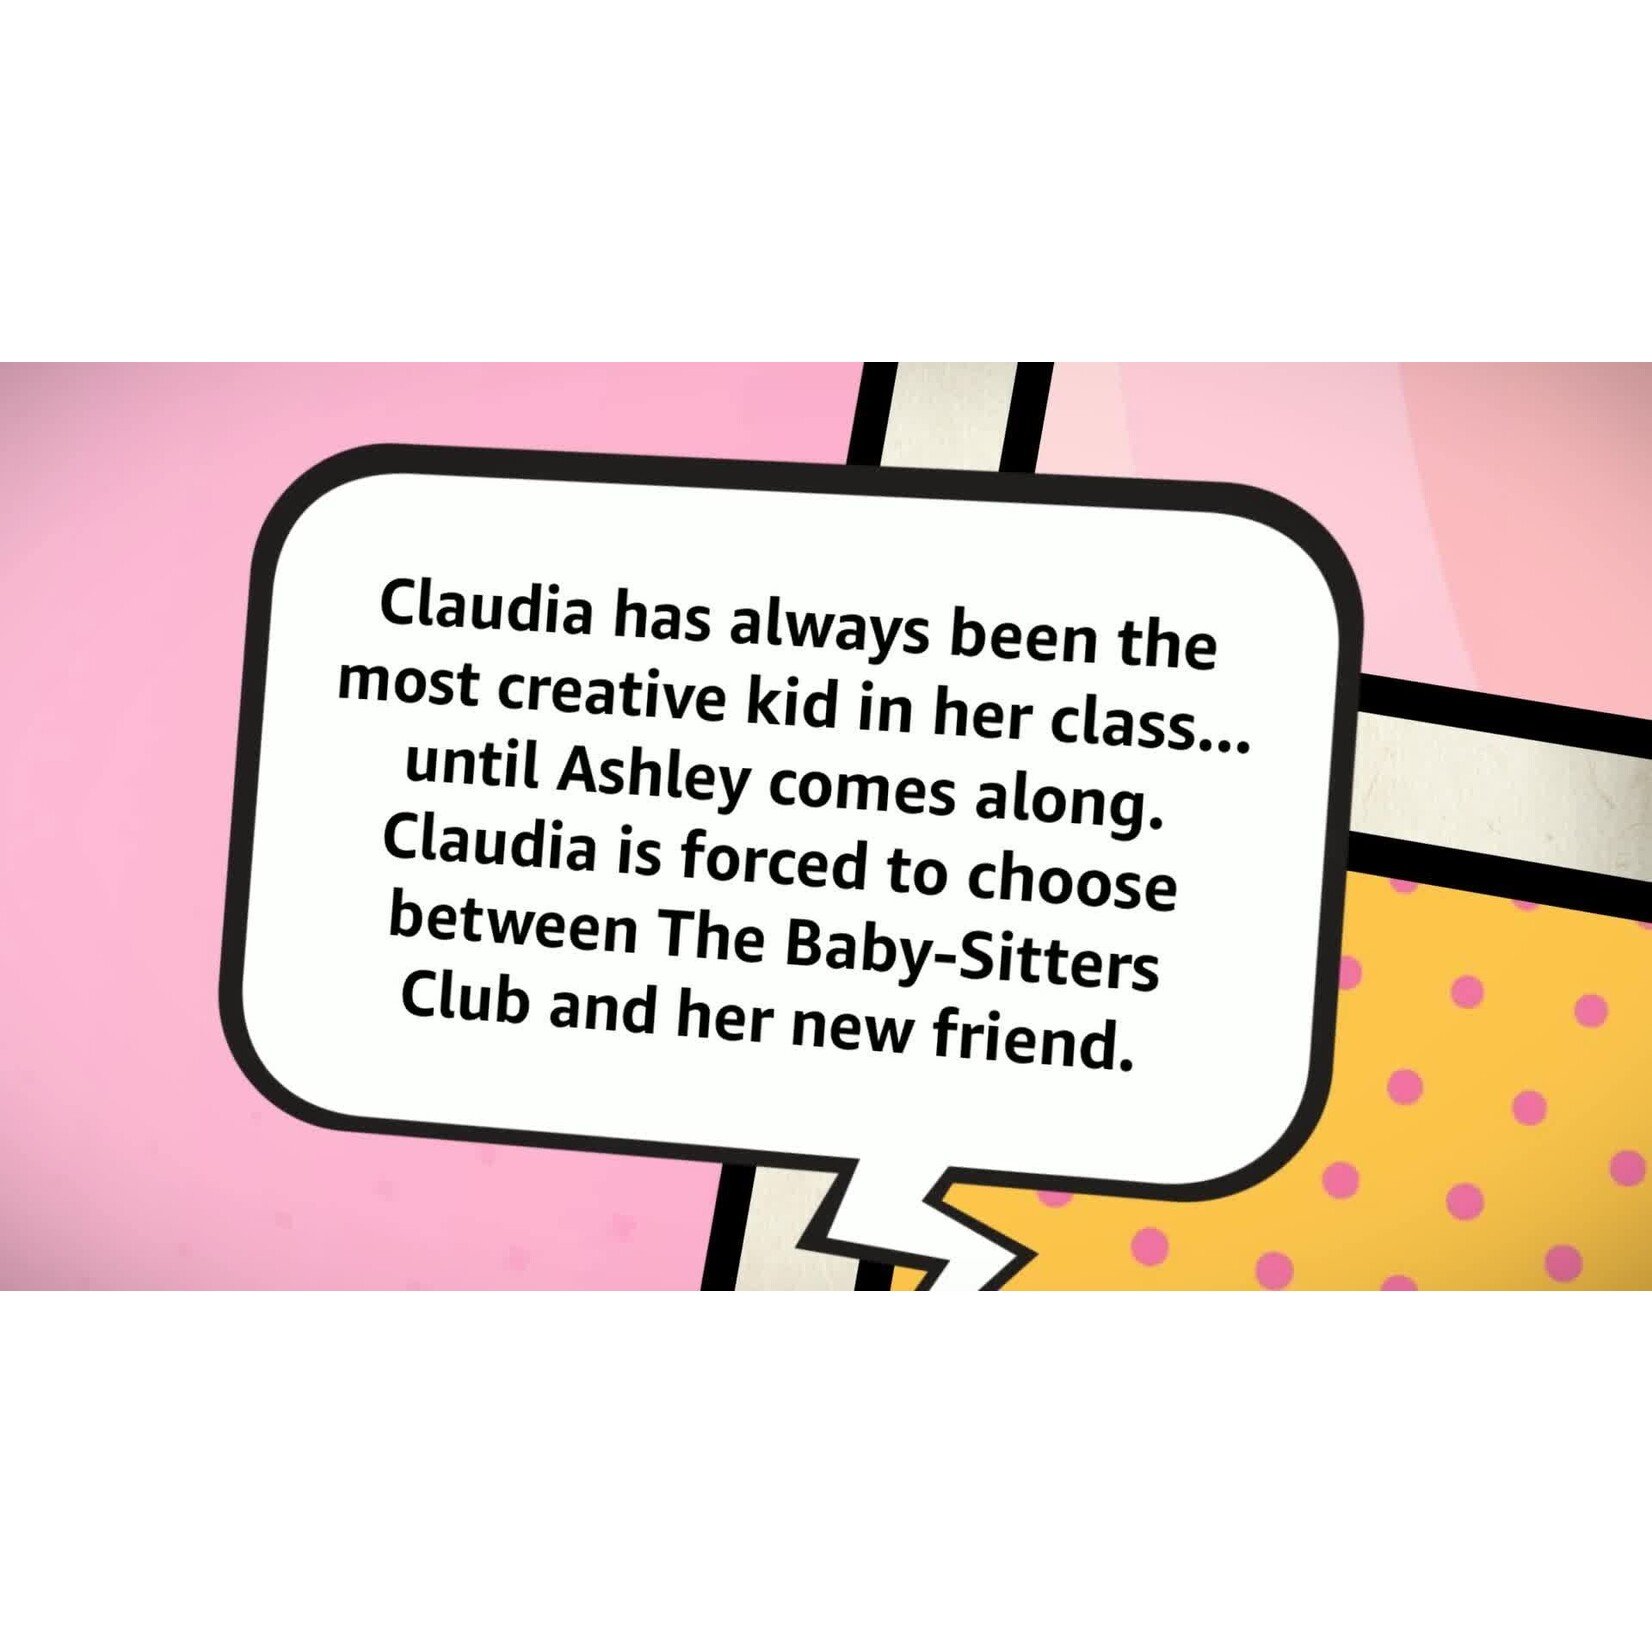 Claudia and the New Girl: A Graphic Novel (The Baby-Sitters Club #9)